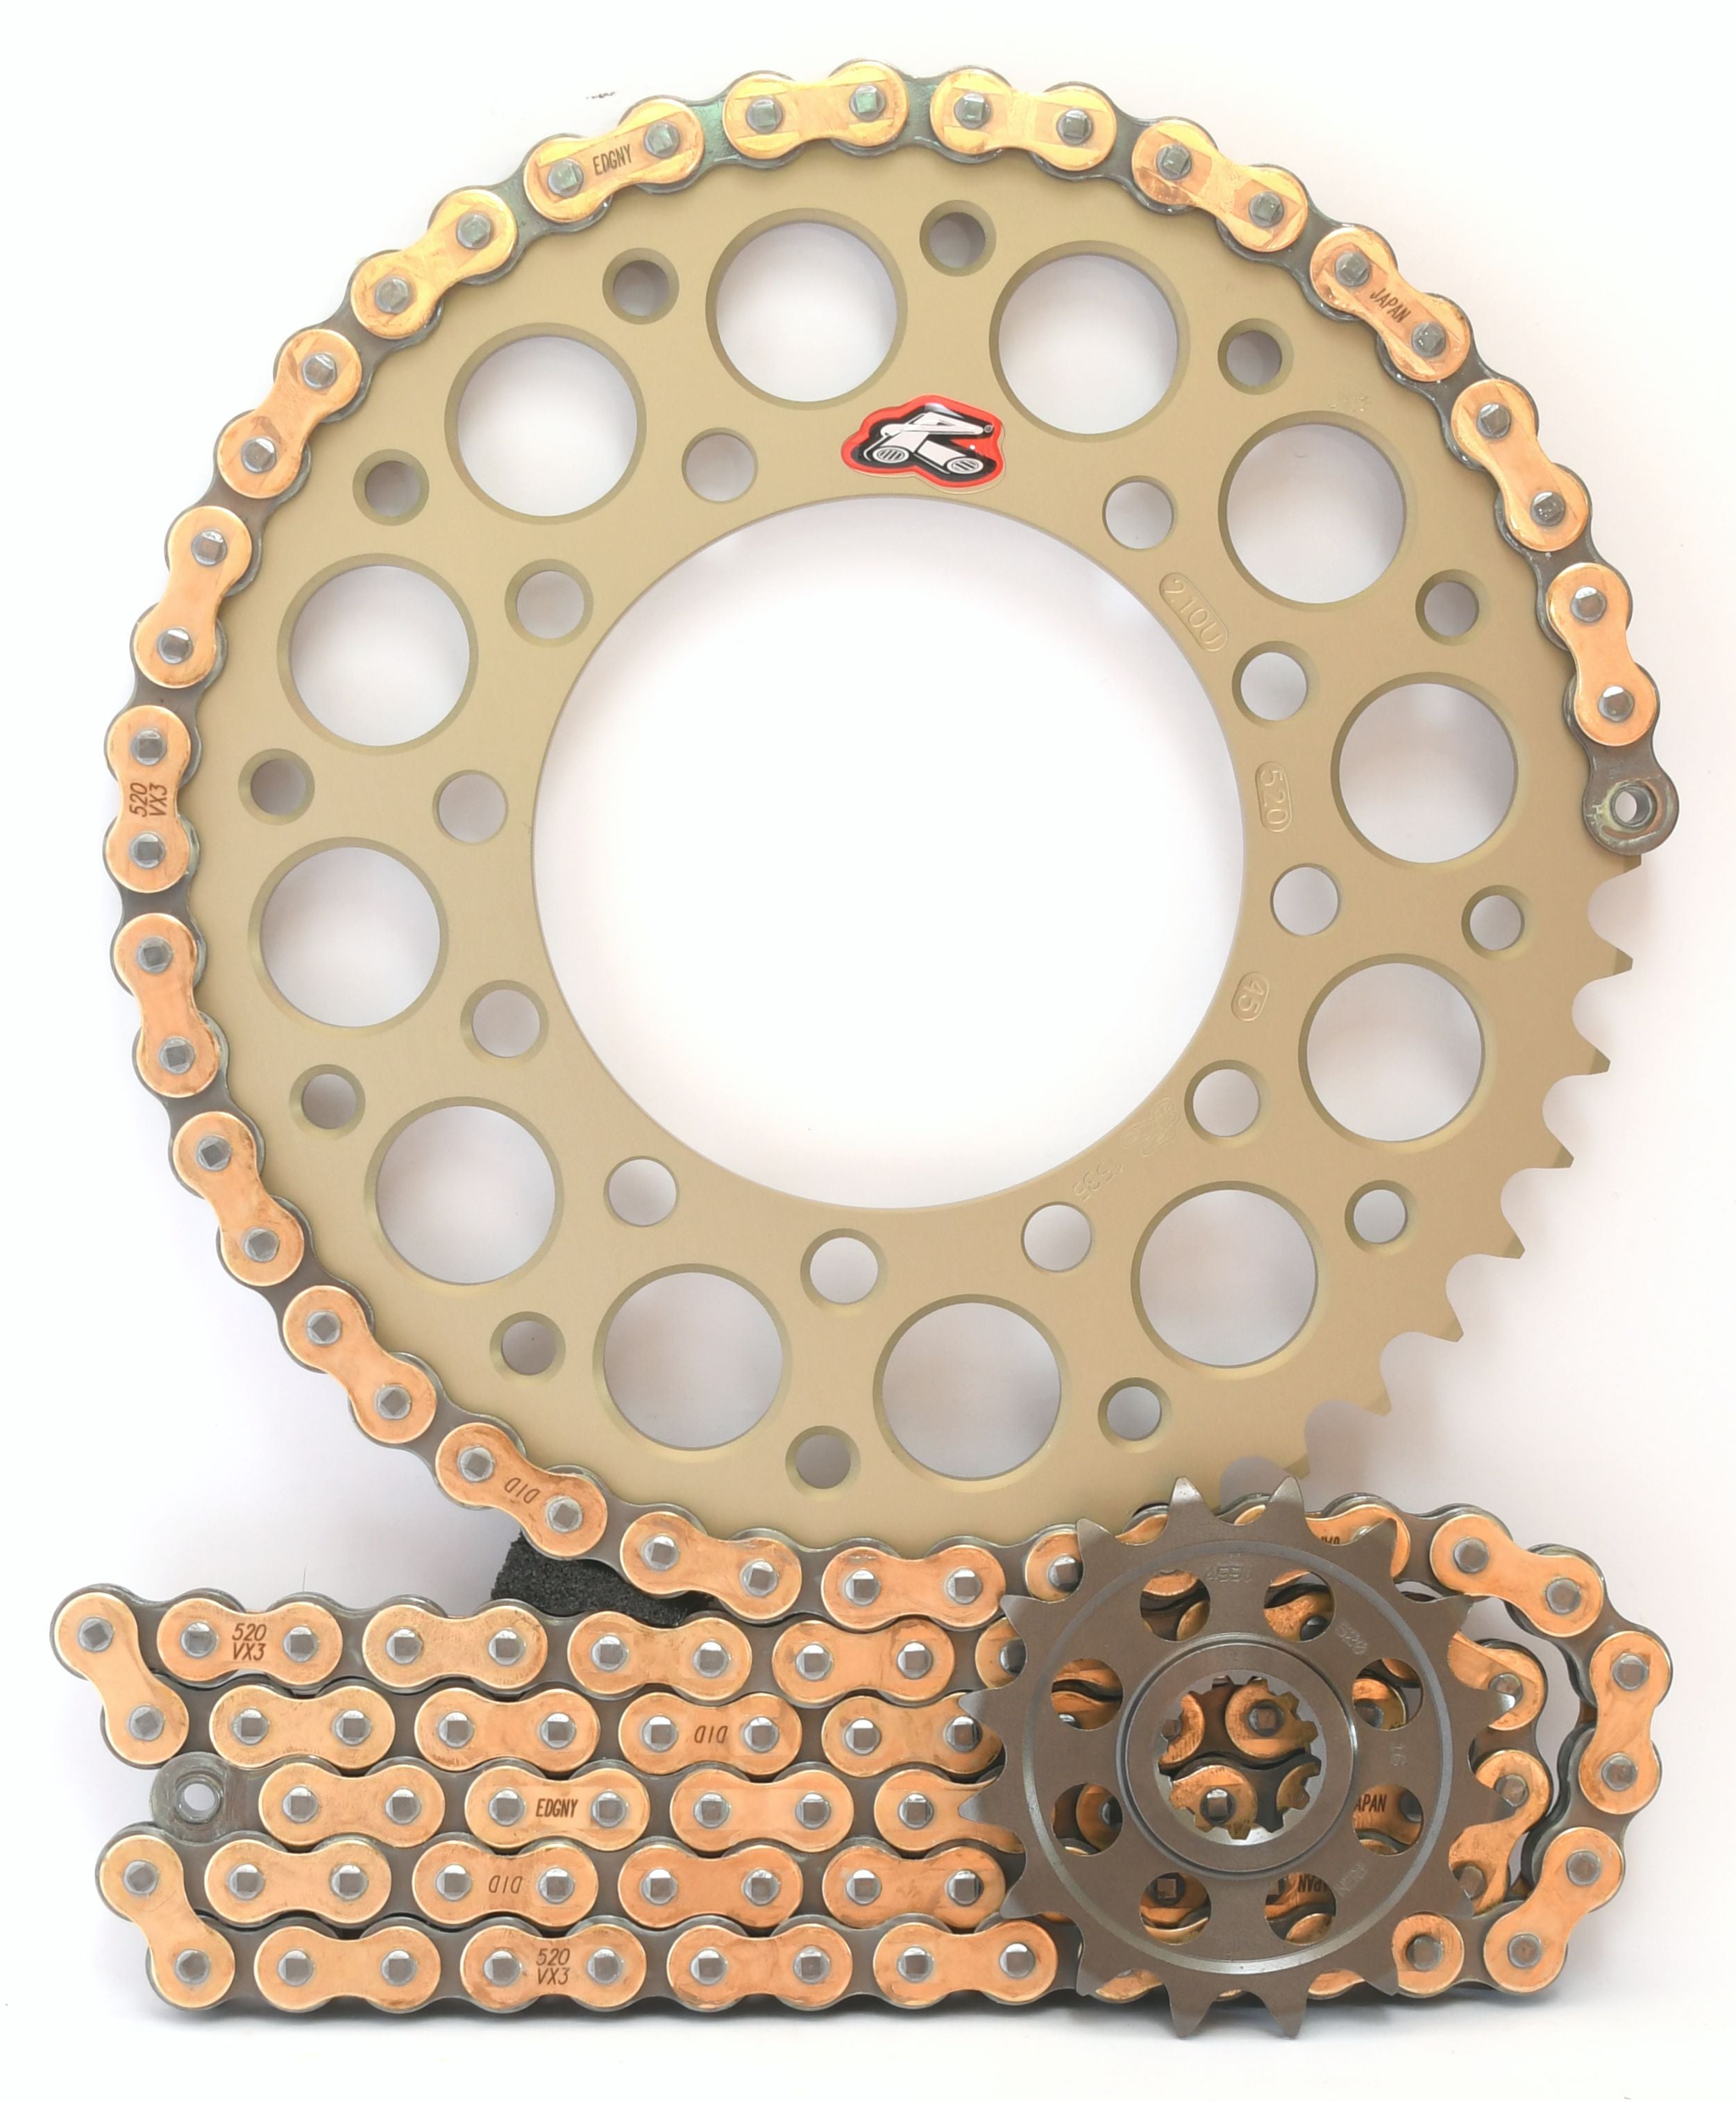 Renthal Ultralight and DID 520 Conversion Chain & Sprocket Kit for S1000RR 2012-2014 - Standard Gearing